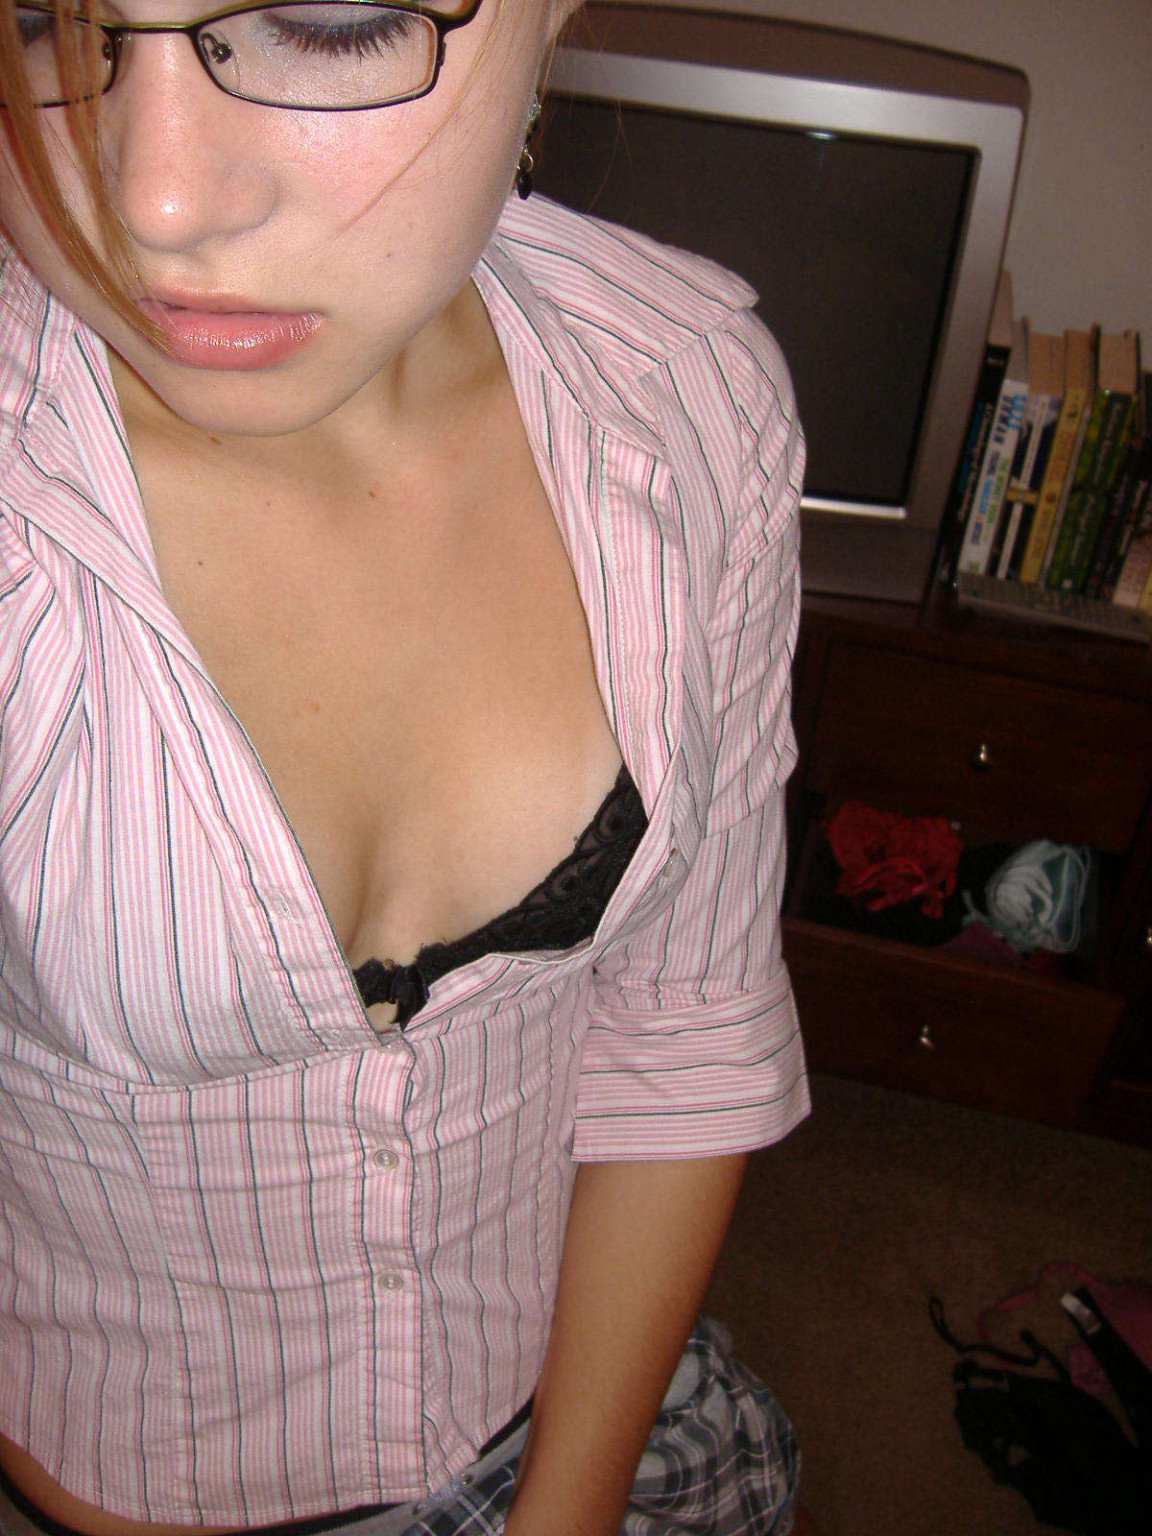 Sexy teen with glasses getting naked #68217608